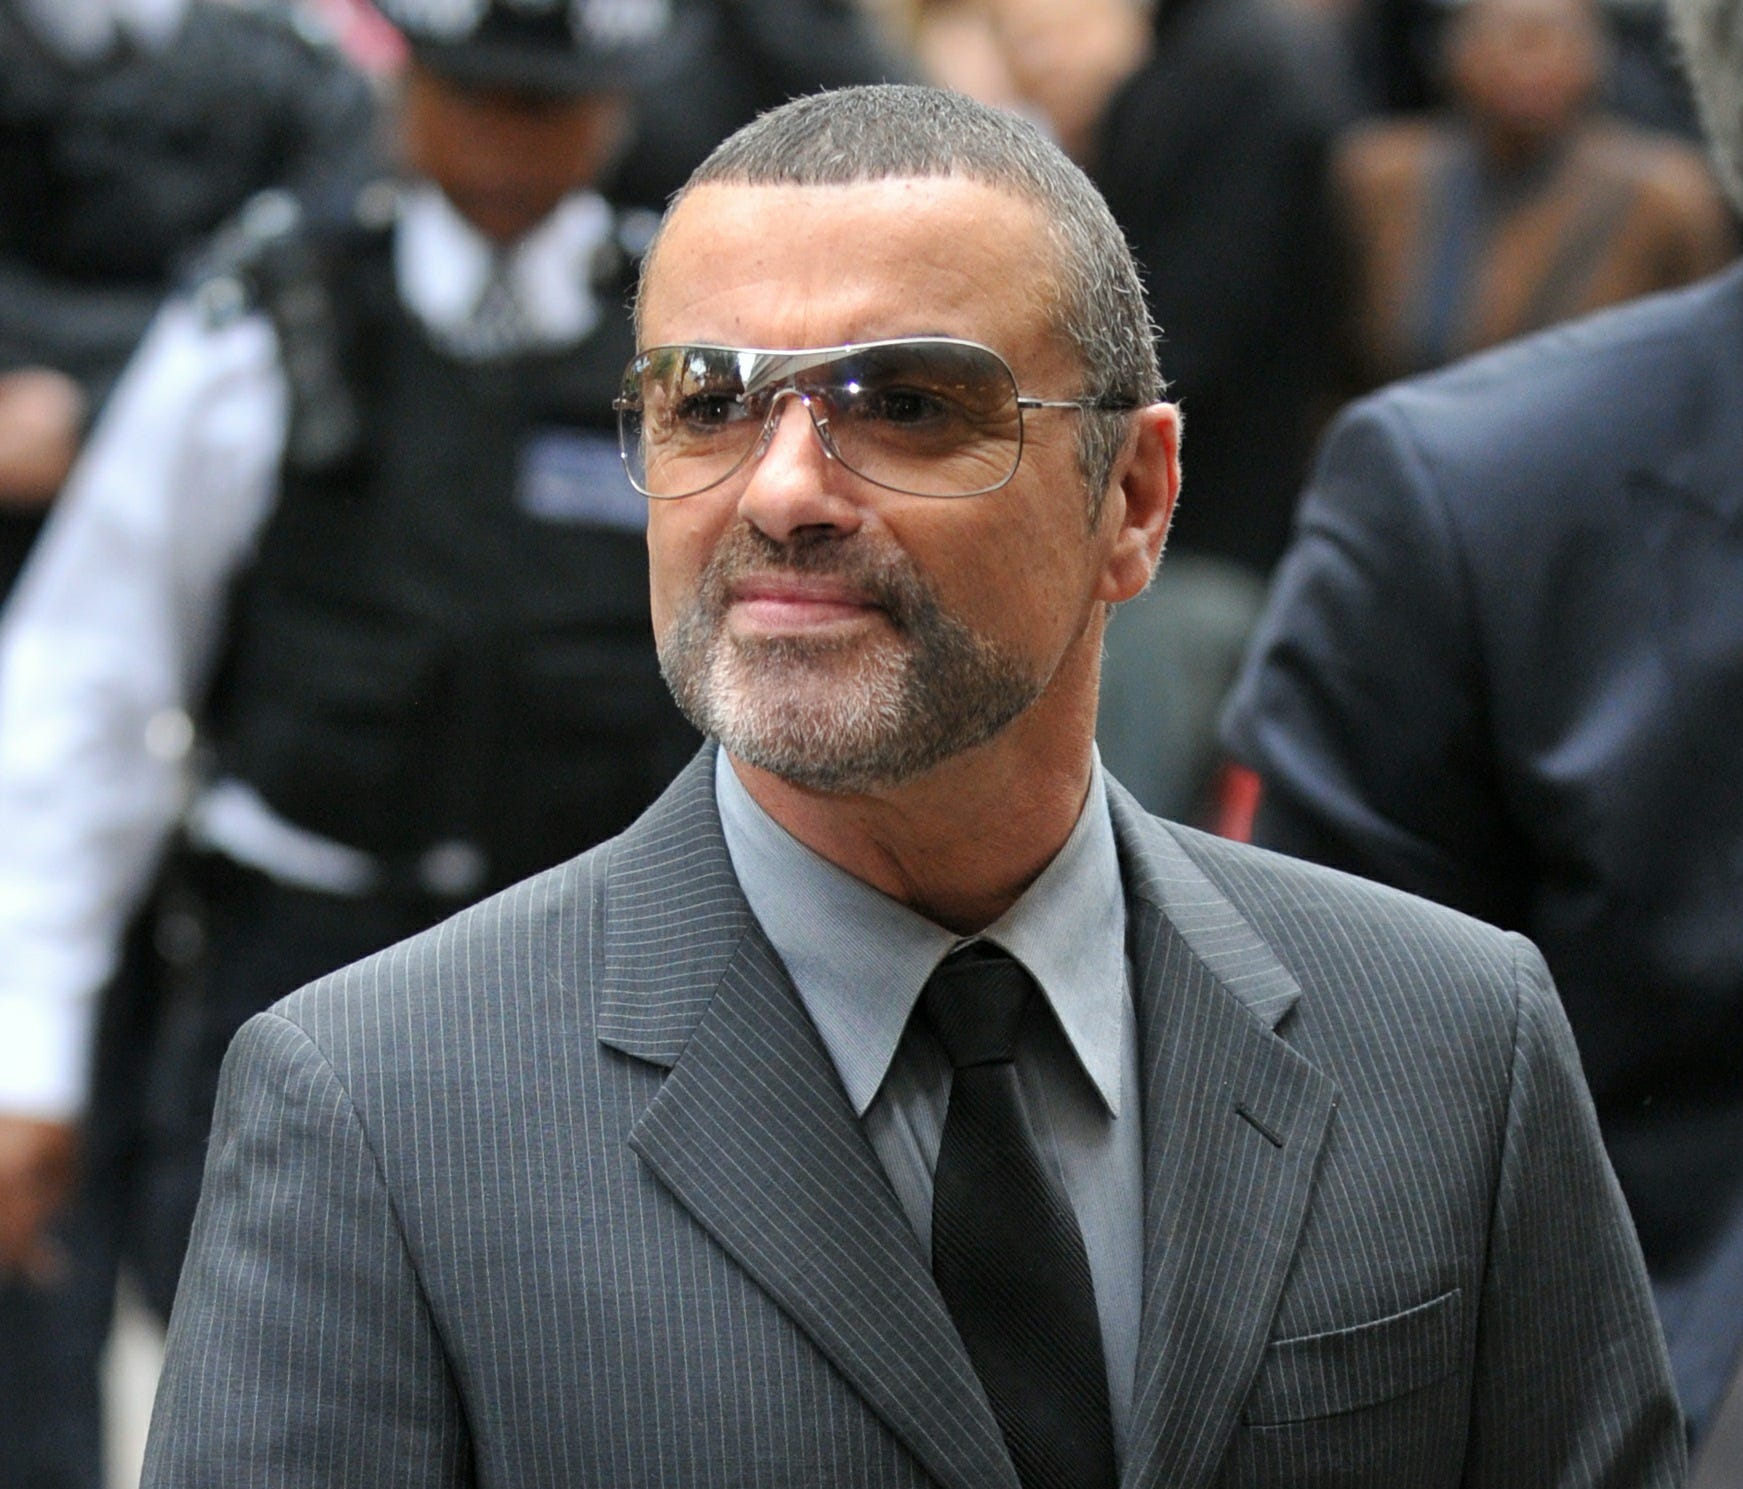 George Michael, pictured here in September 2010, died over the Christmas holiday, his publicist confirms.